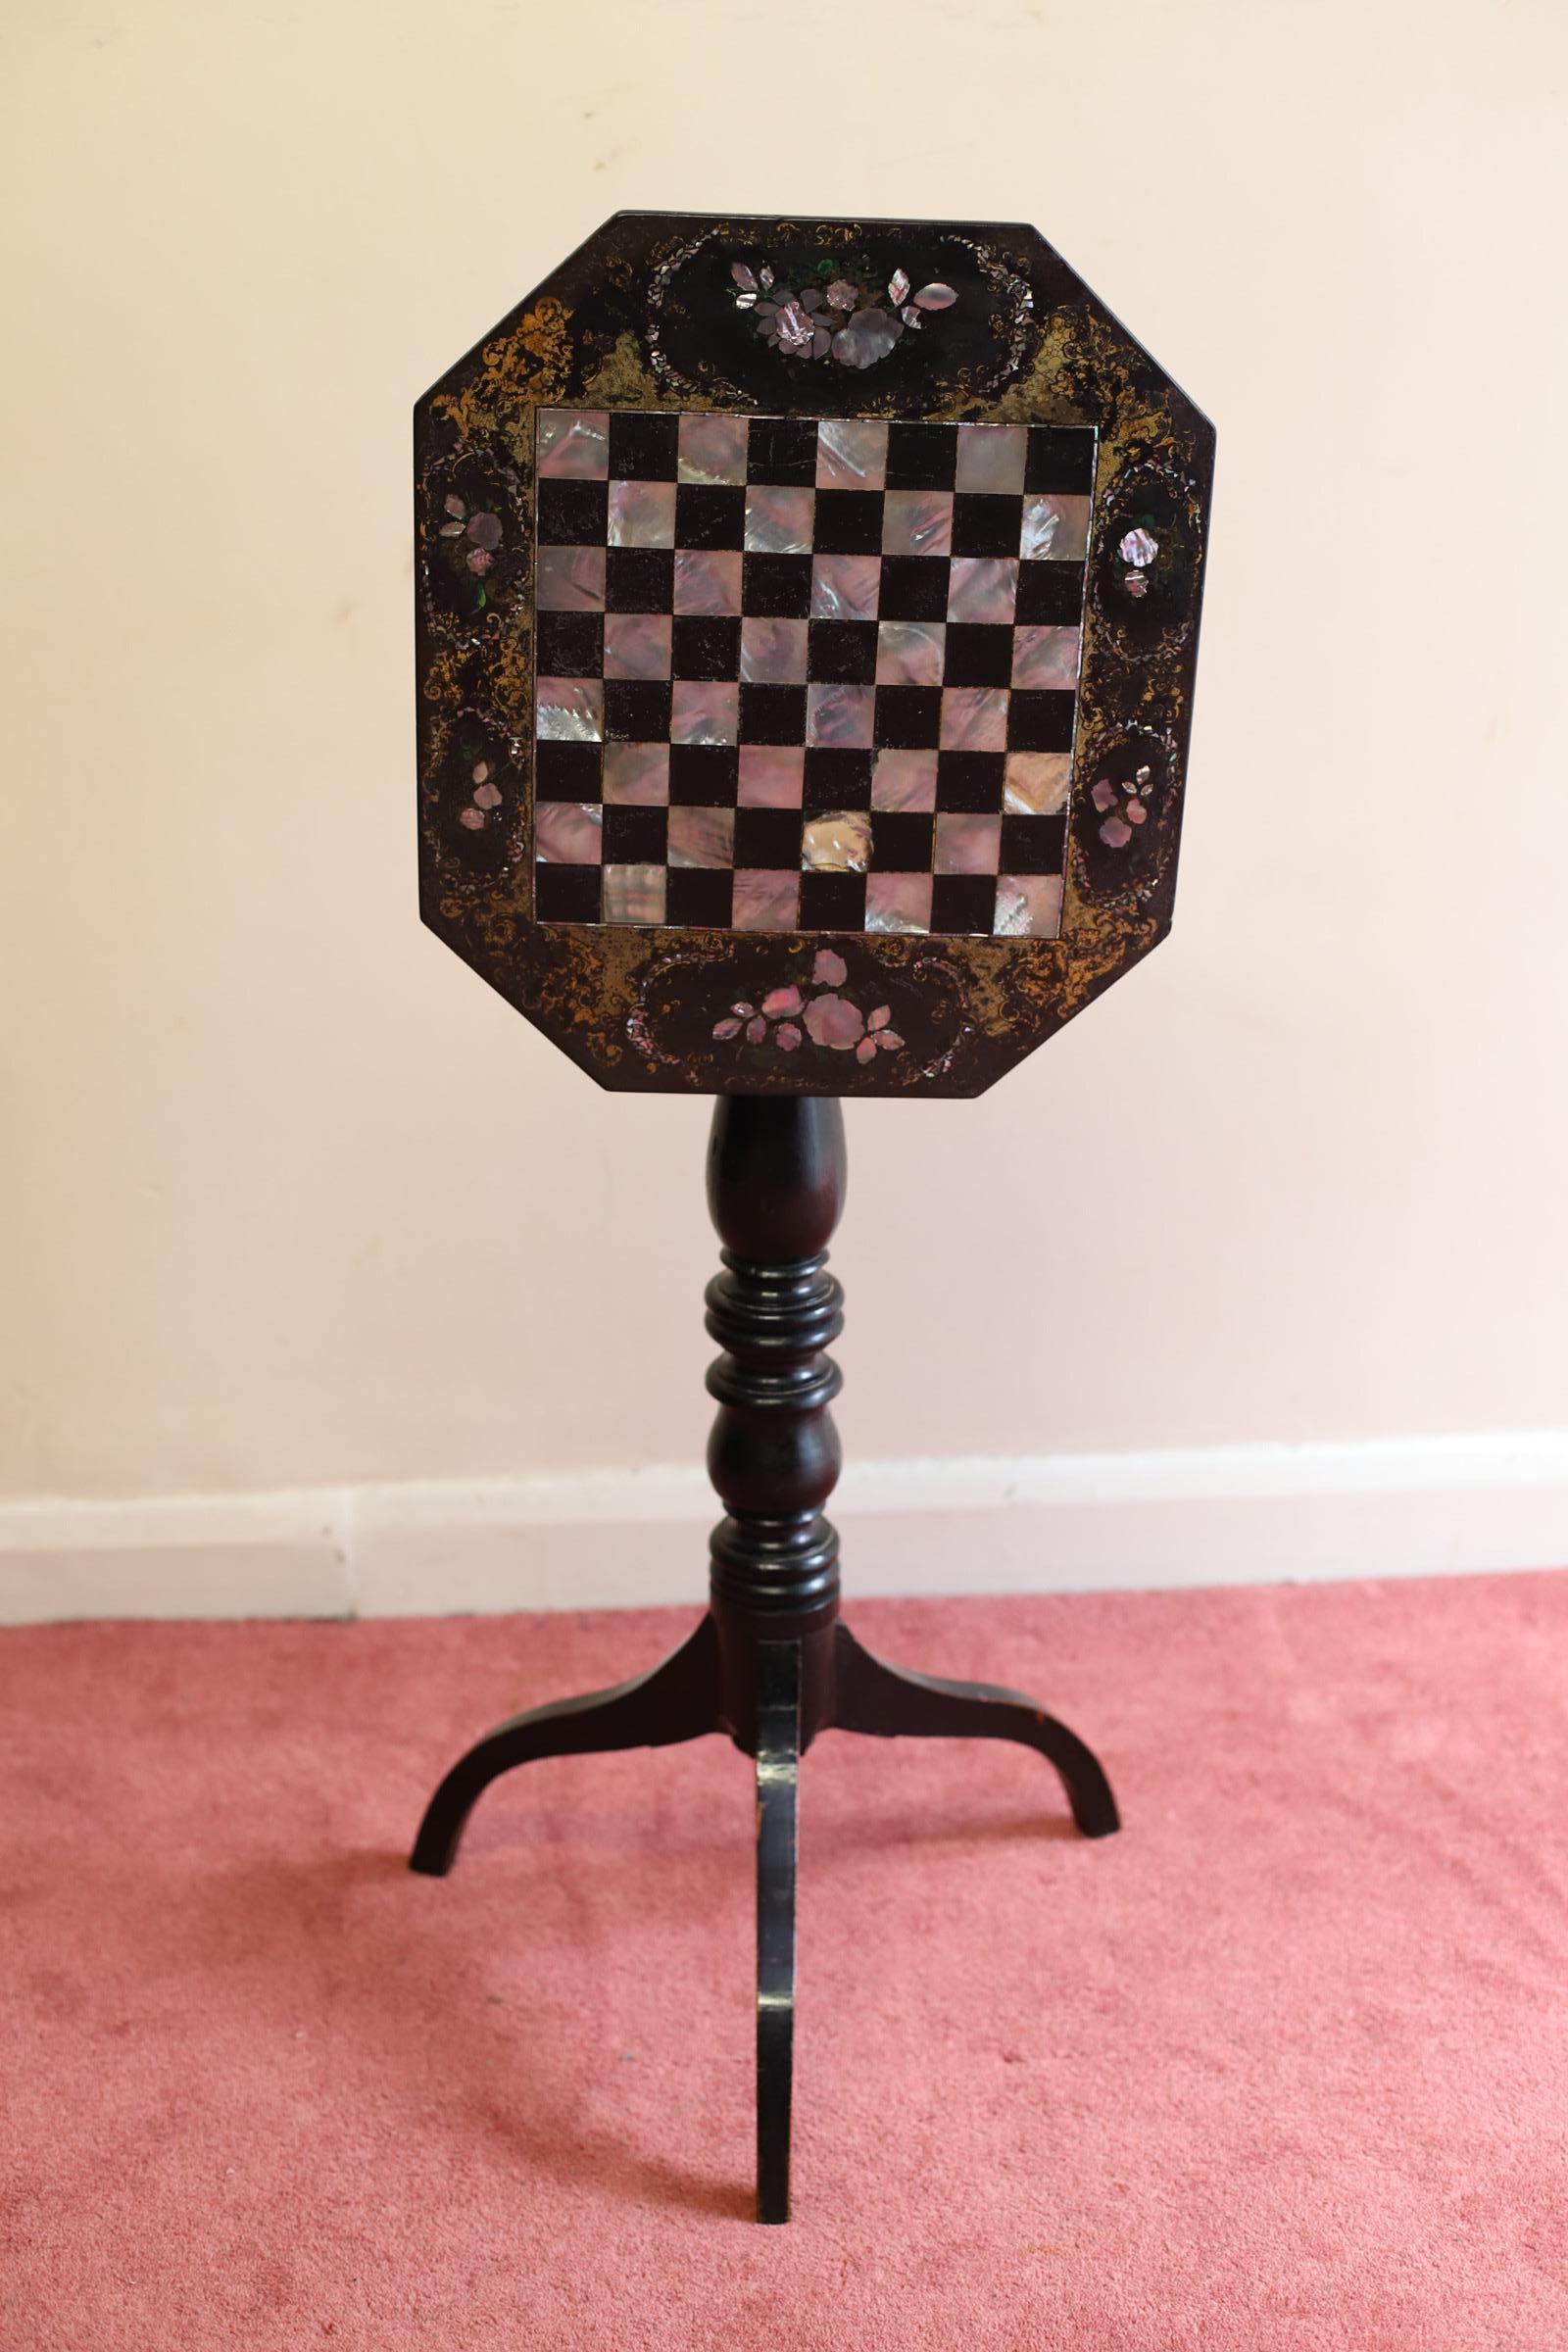 We delight to offer for sale an early Victorian ebonized and papier-mâché tip-top games table, the top inlaid with a mother-of-pearl chessboard, this table it was made by Jennens and Bettridge between 1840-1850 . 
The firm of Jennens & Bettridge was